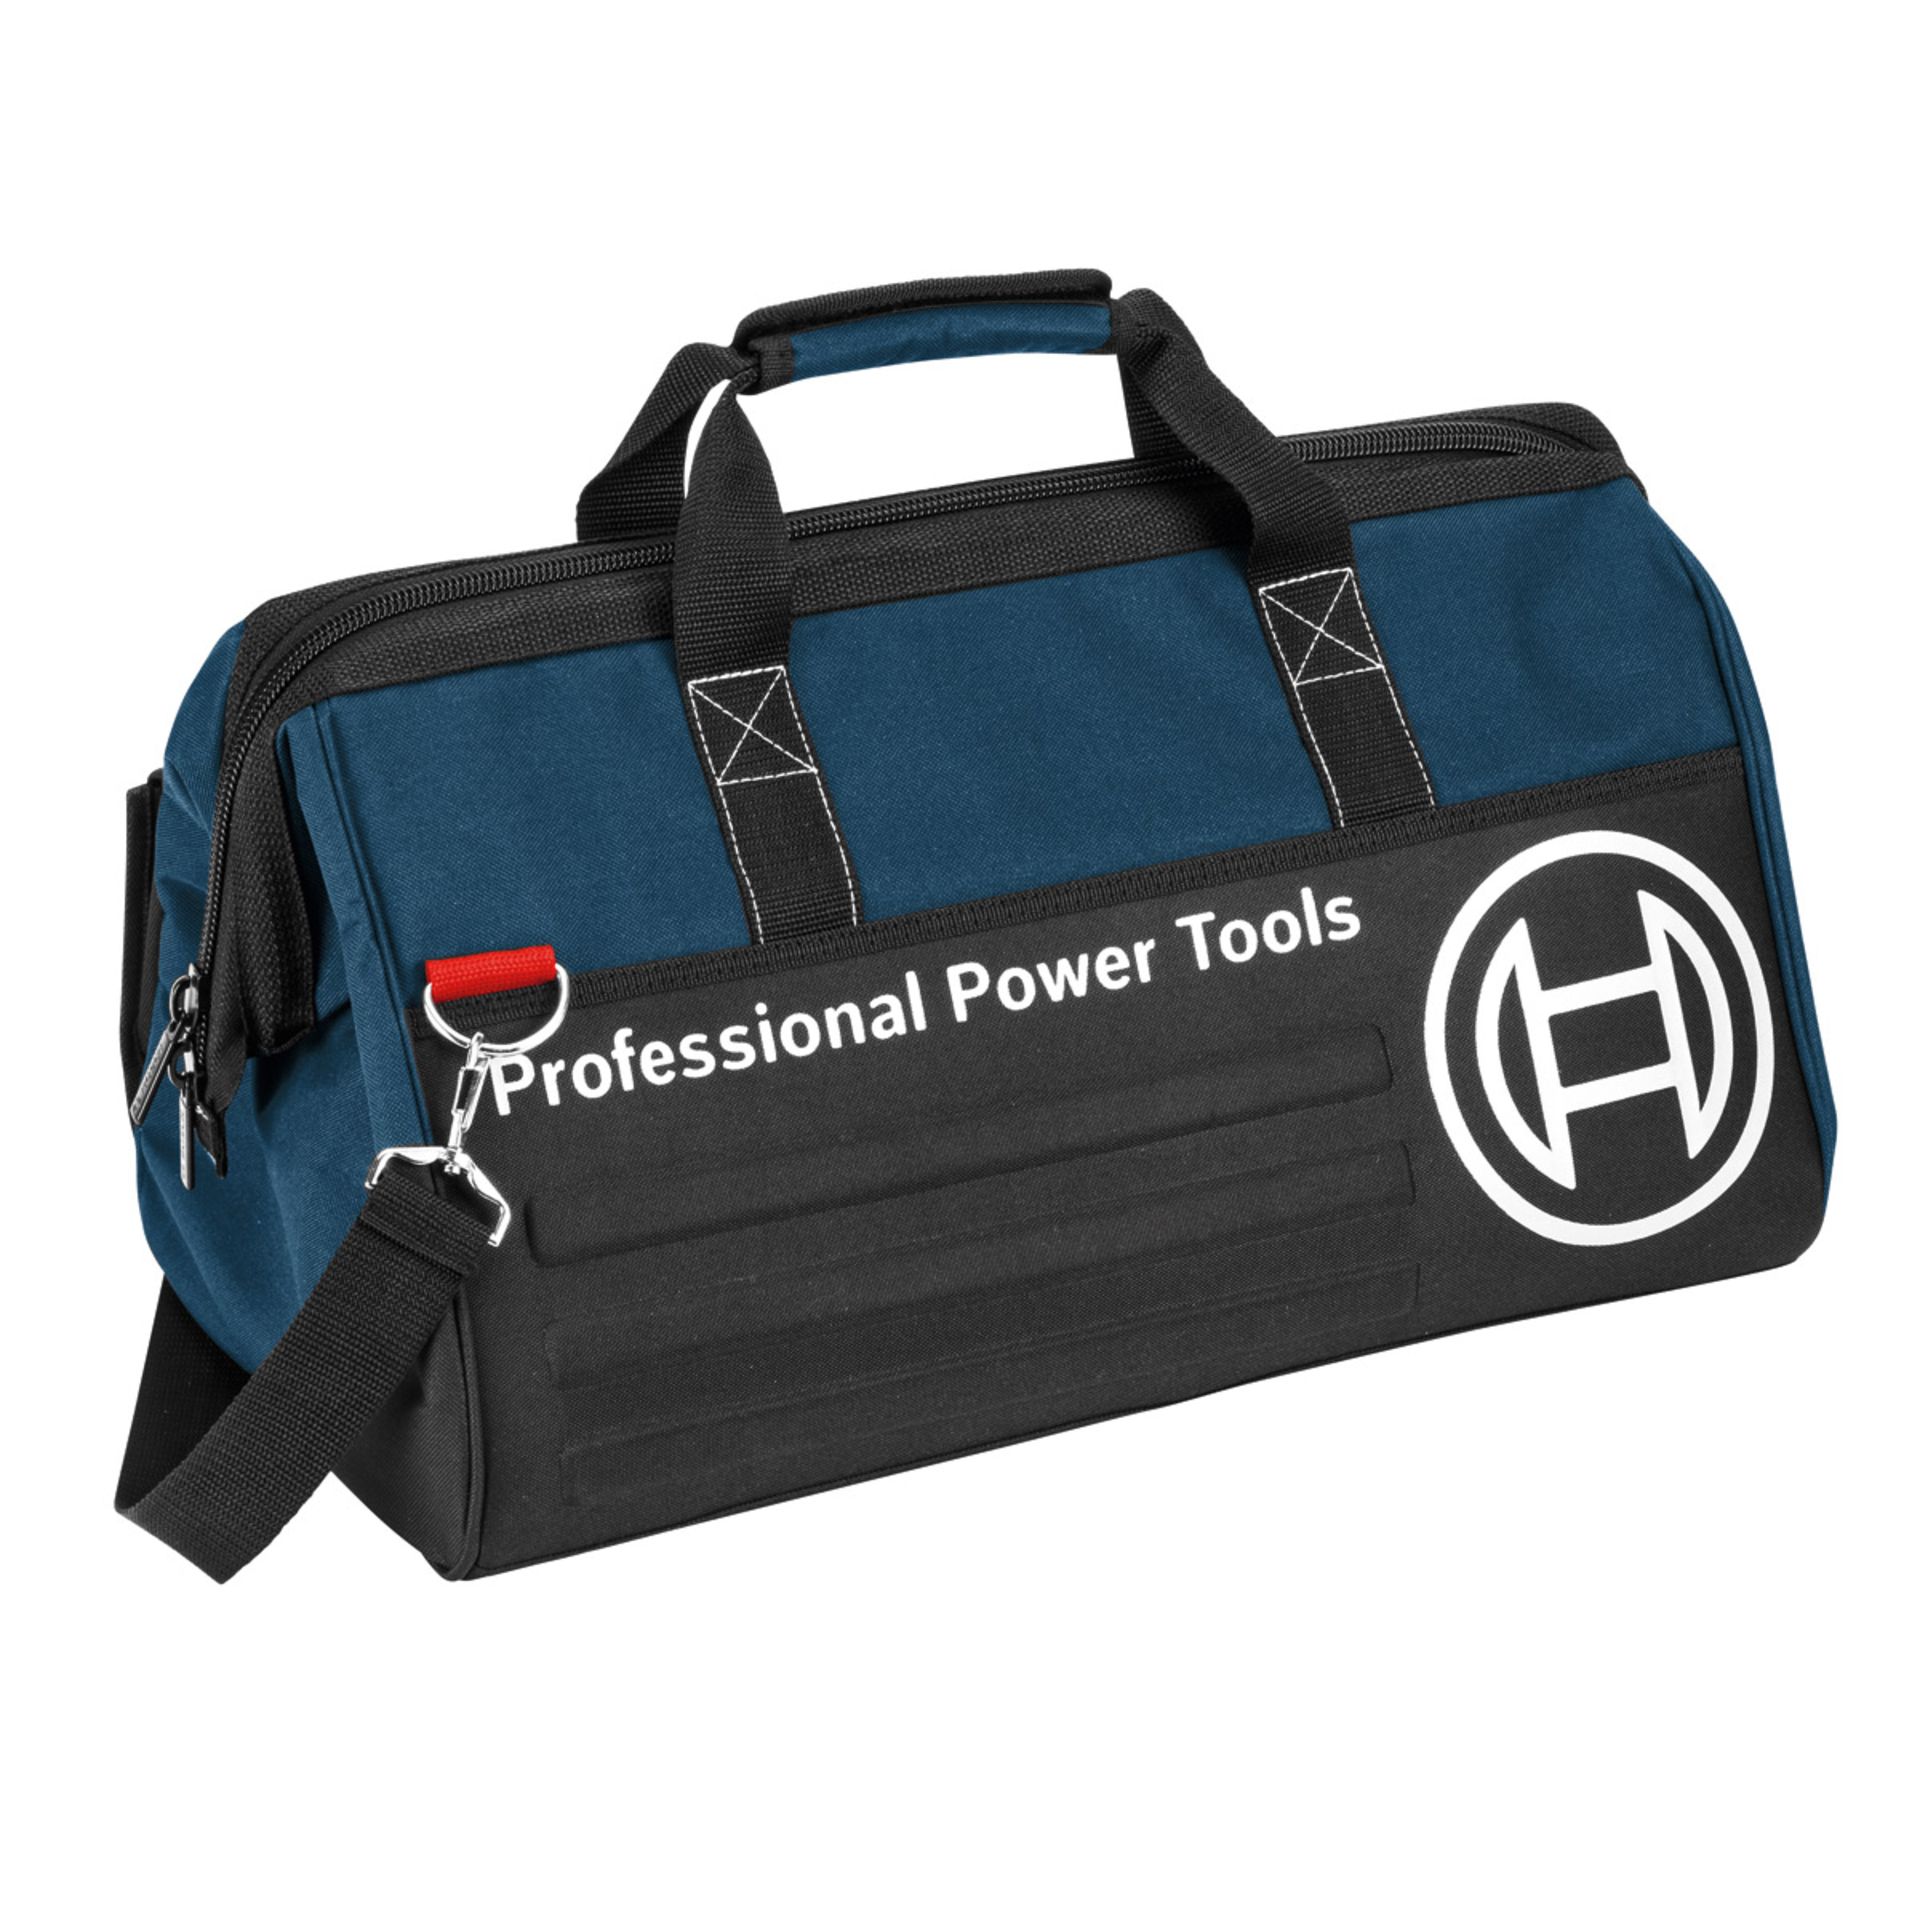 V Brand New Bosch Power Tools "Africa" Bag With Three Exterior Side Pockets And Five Internal Side